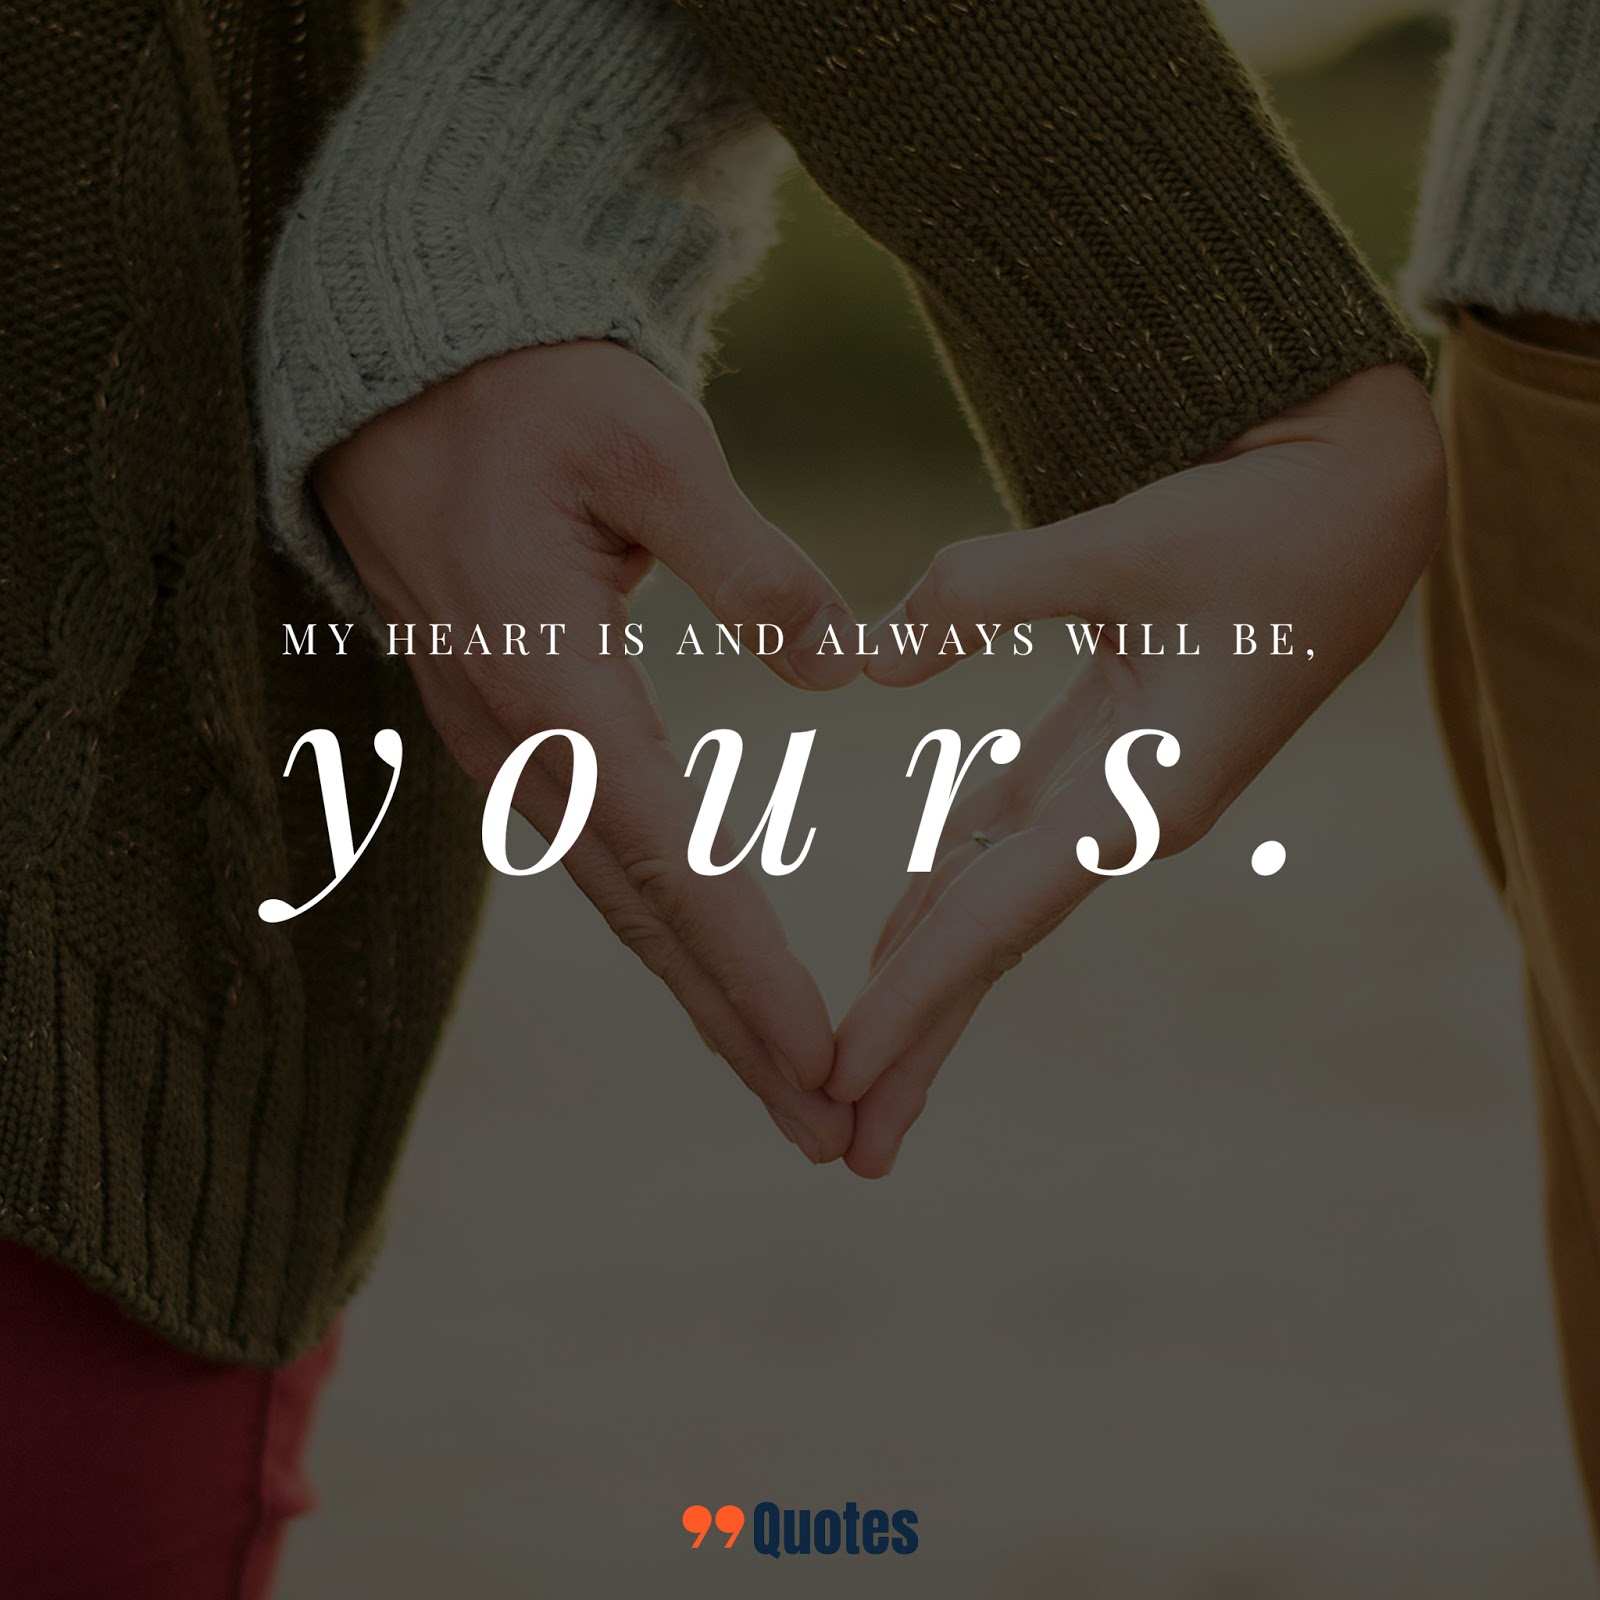 99 Cute Short Love Quotes  for Him and for her to make 